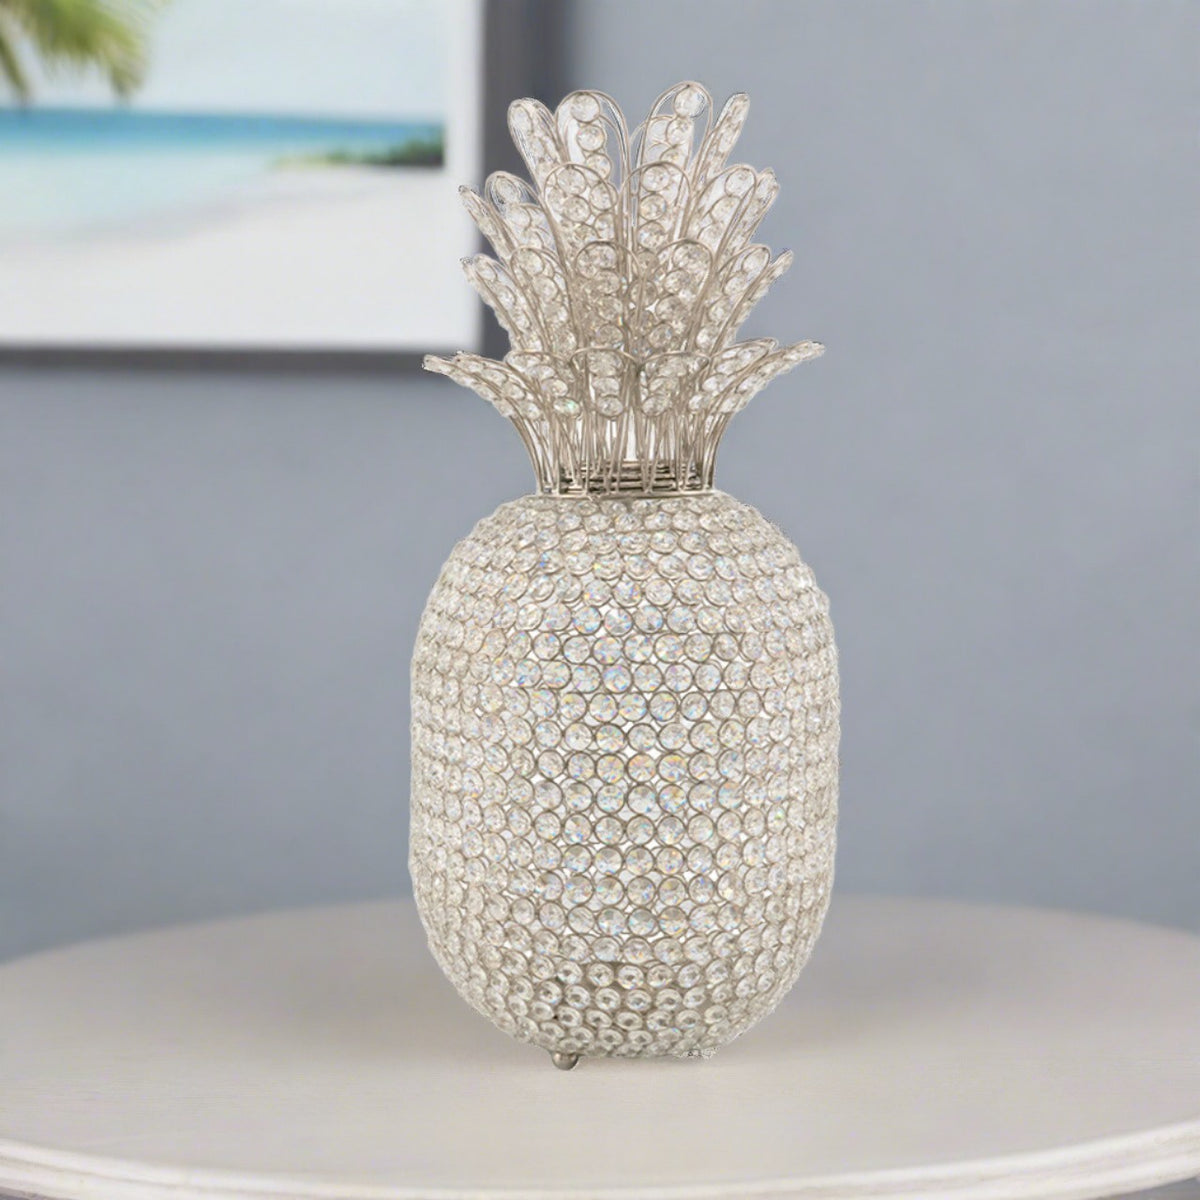 Pina Large Crystal Pineapple Decor, Gold or Silver – Adley & Company